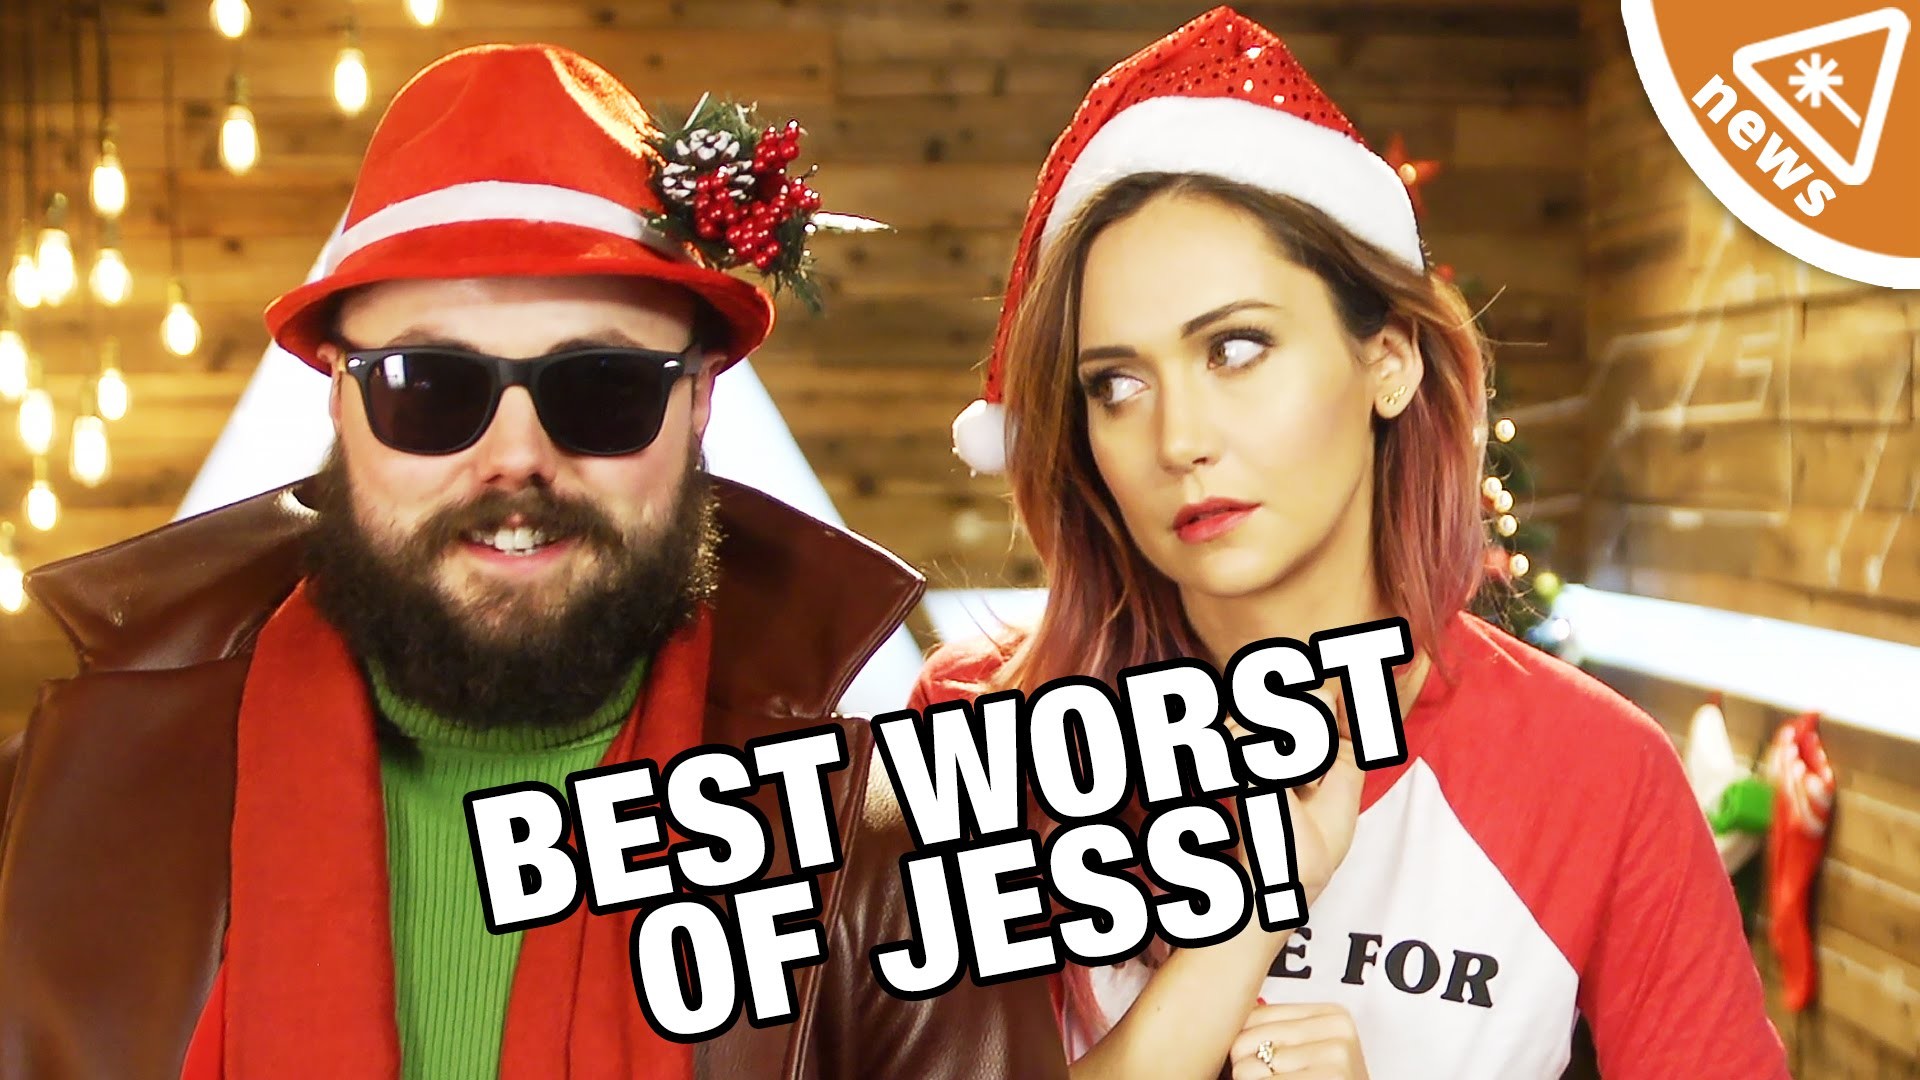 1920x1080 The Best and Worst of Jessica Chobot from 2015! (Nerdist News w/ Jessica  Chobot) - YouTube